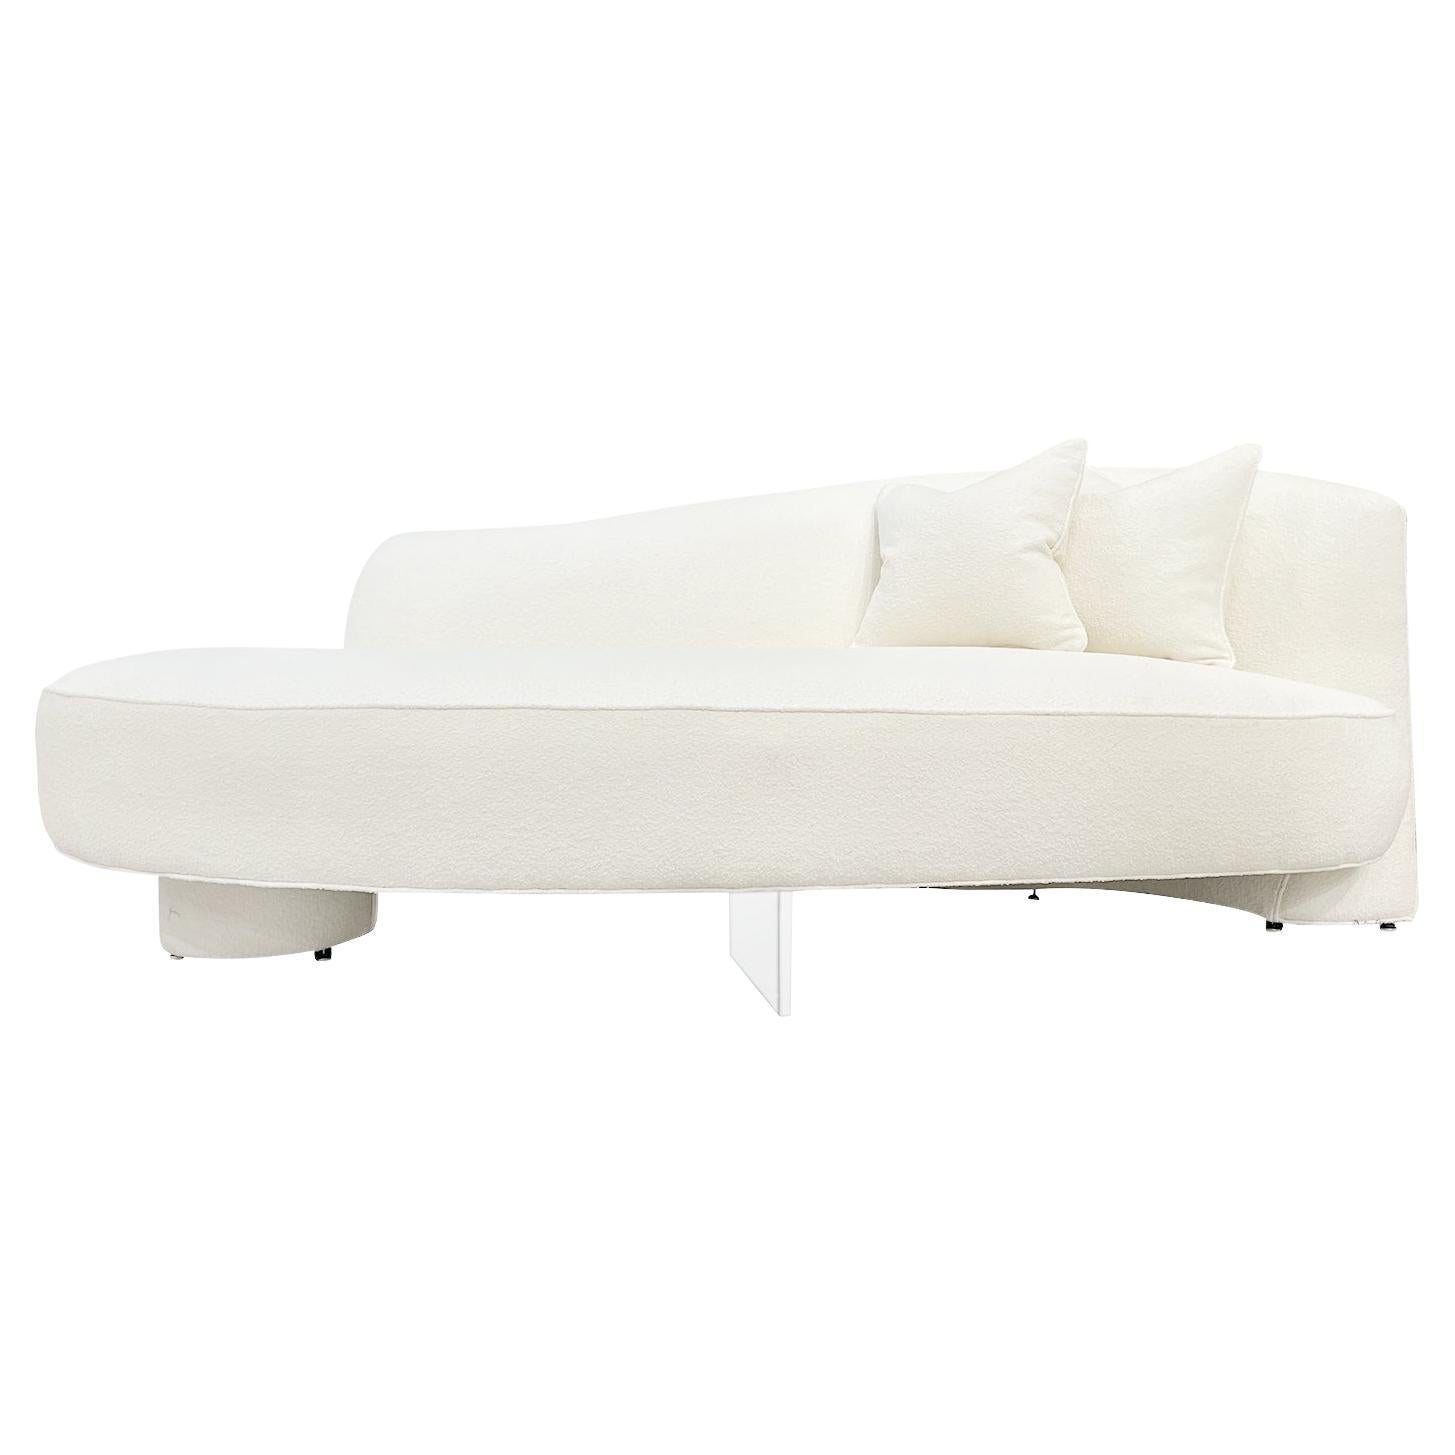 20th Century American Lucite Four Seater Serpentine Sofa by Vladimir Kagan For Sale